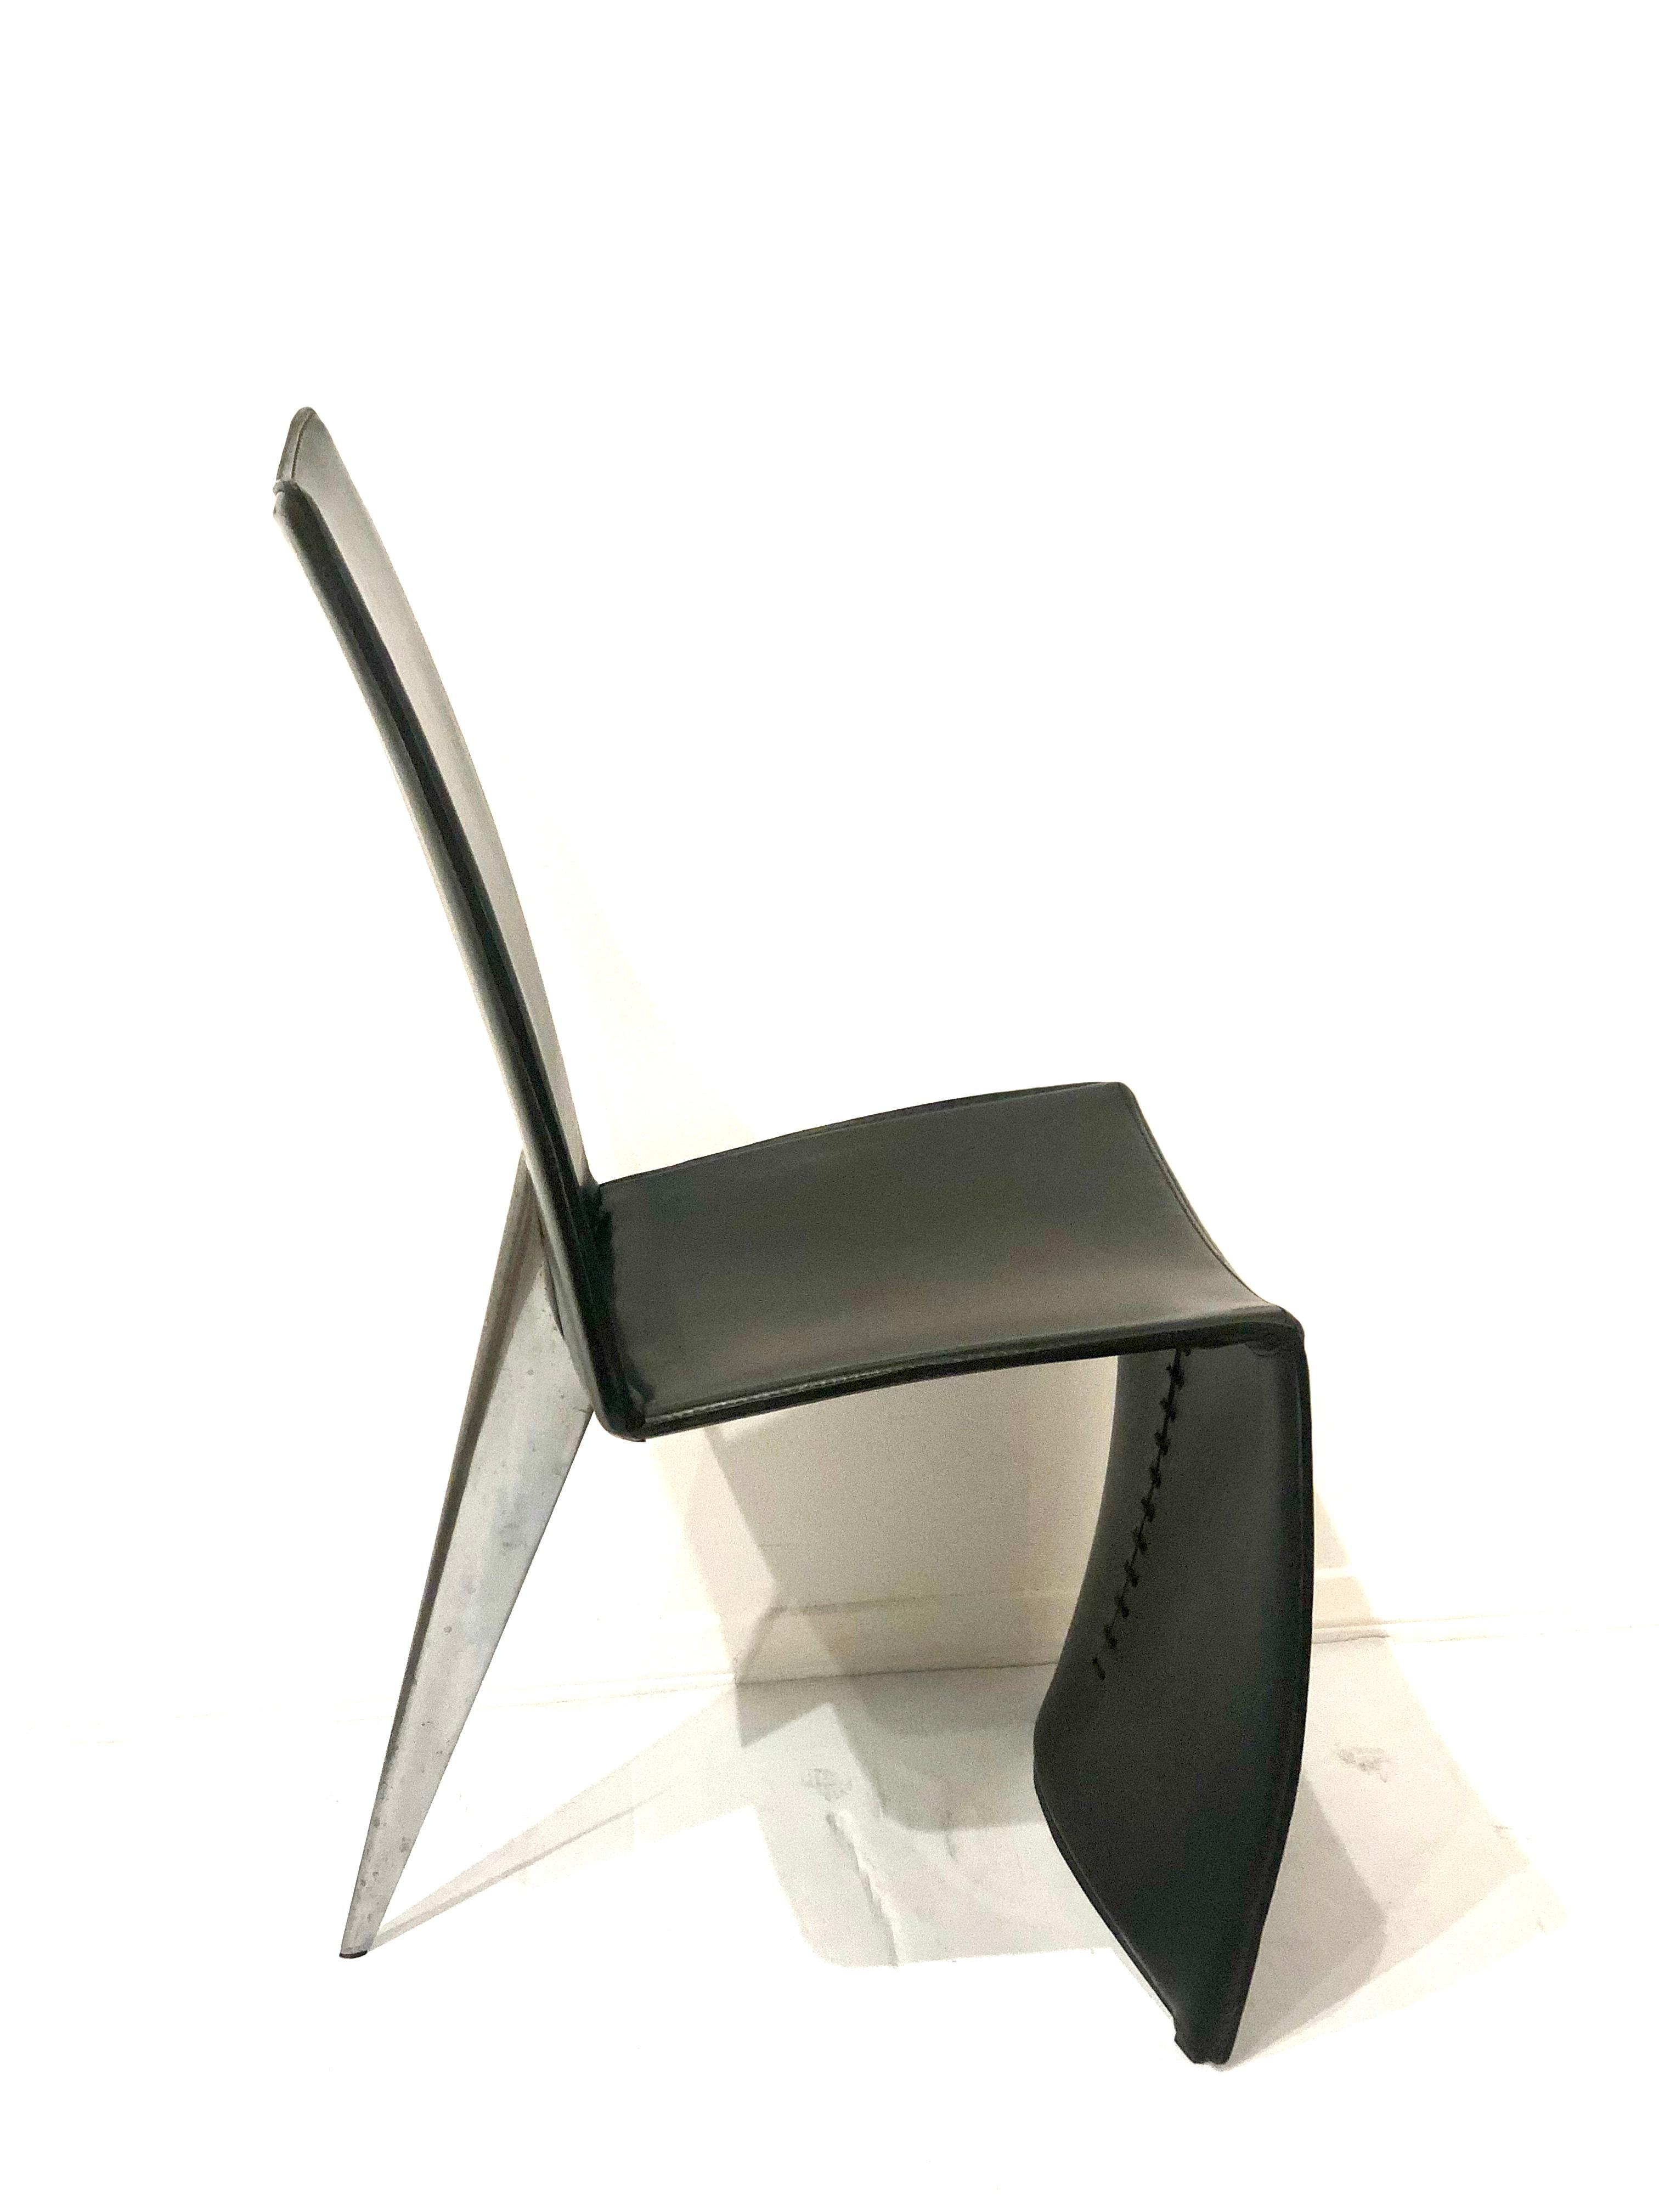 Post-Modern Striking Ed Archer Chair by Philippe Starck for Driade